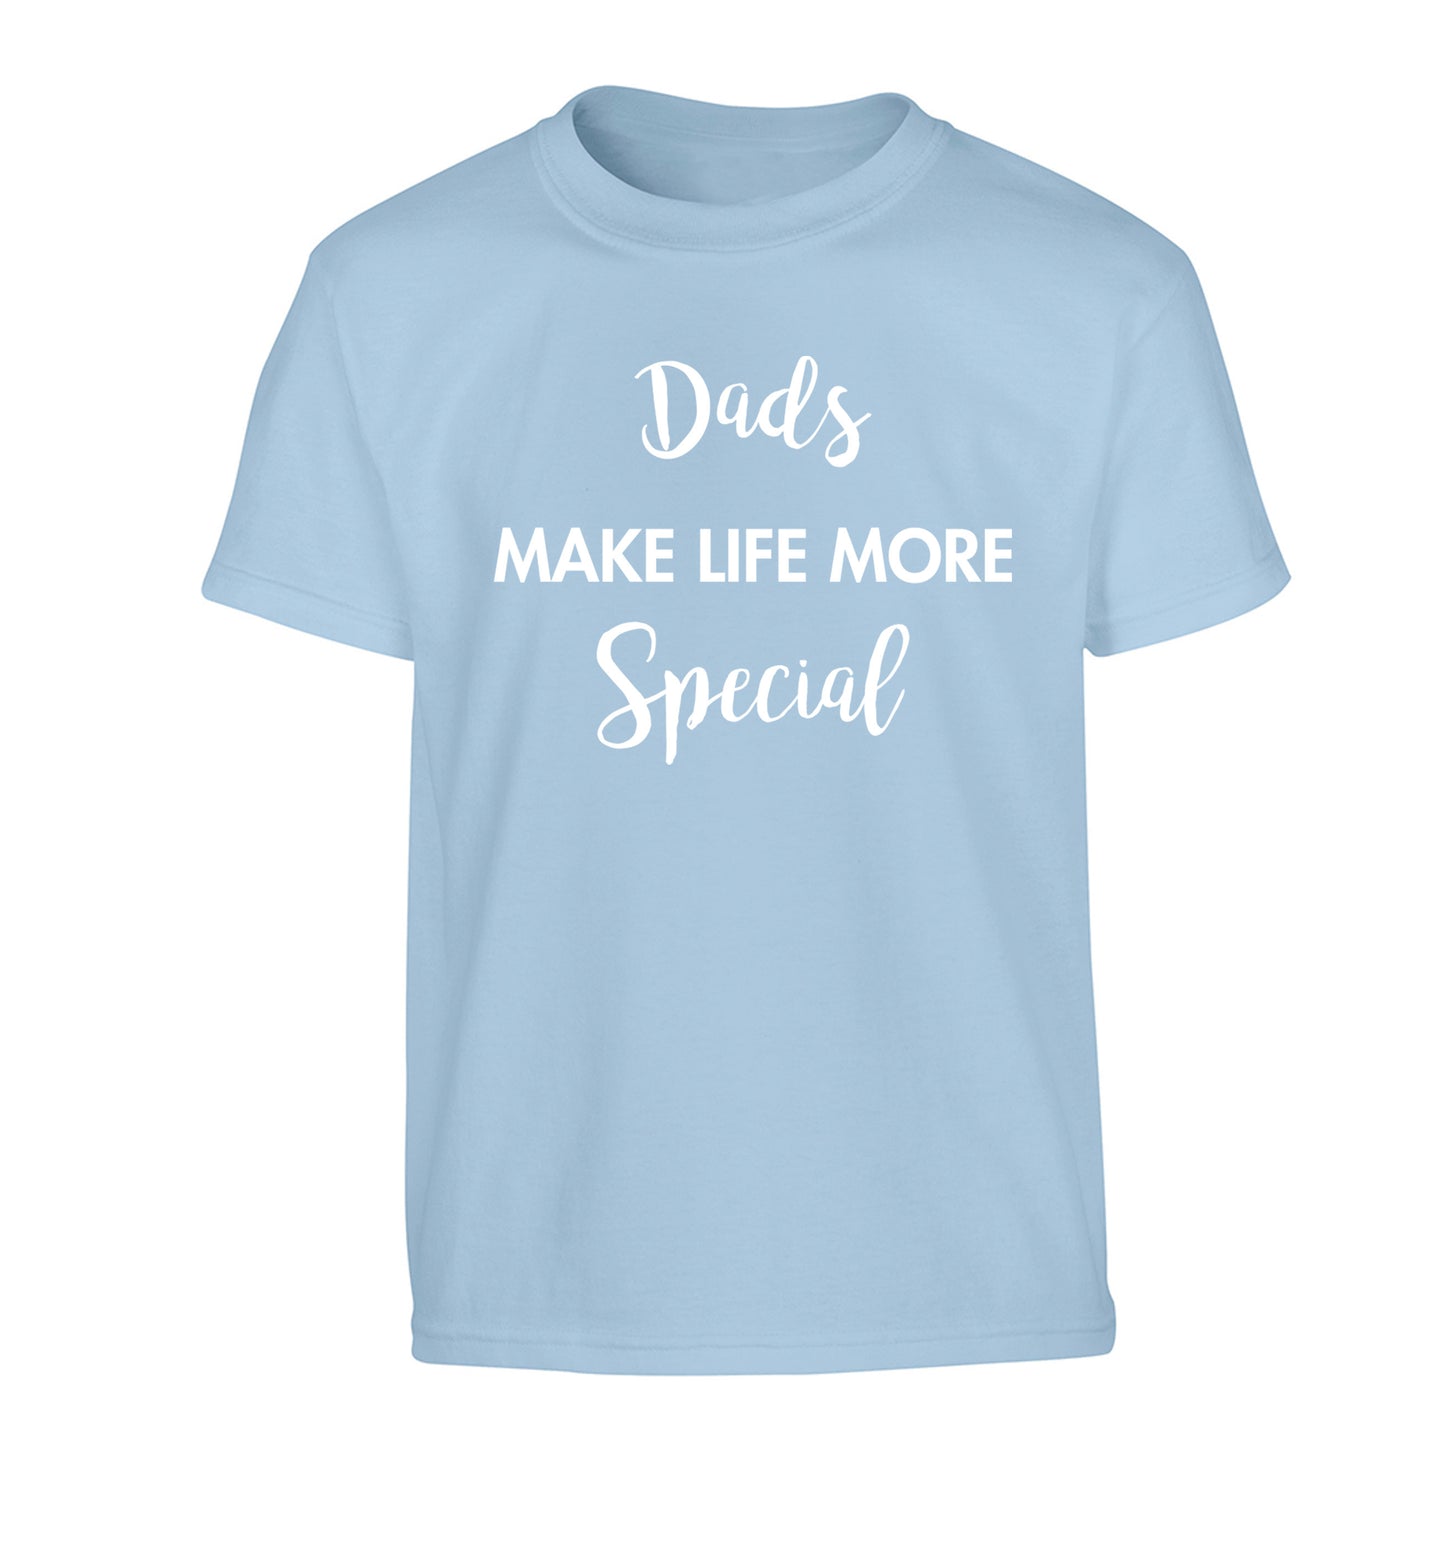 Dads make life more special Children's light blue Tshirt 12-14 Years